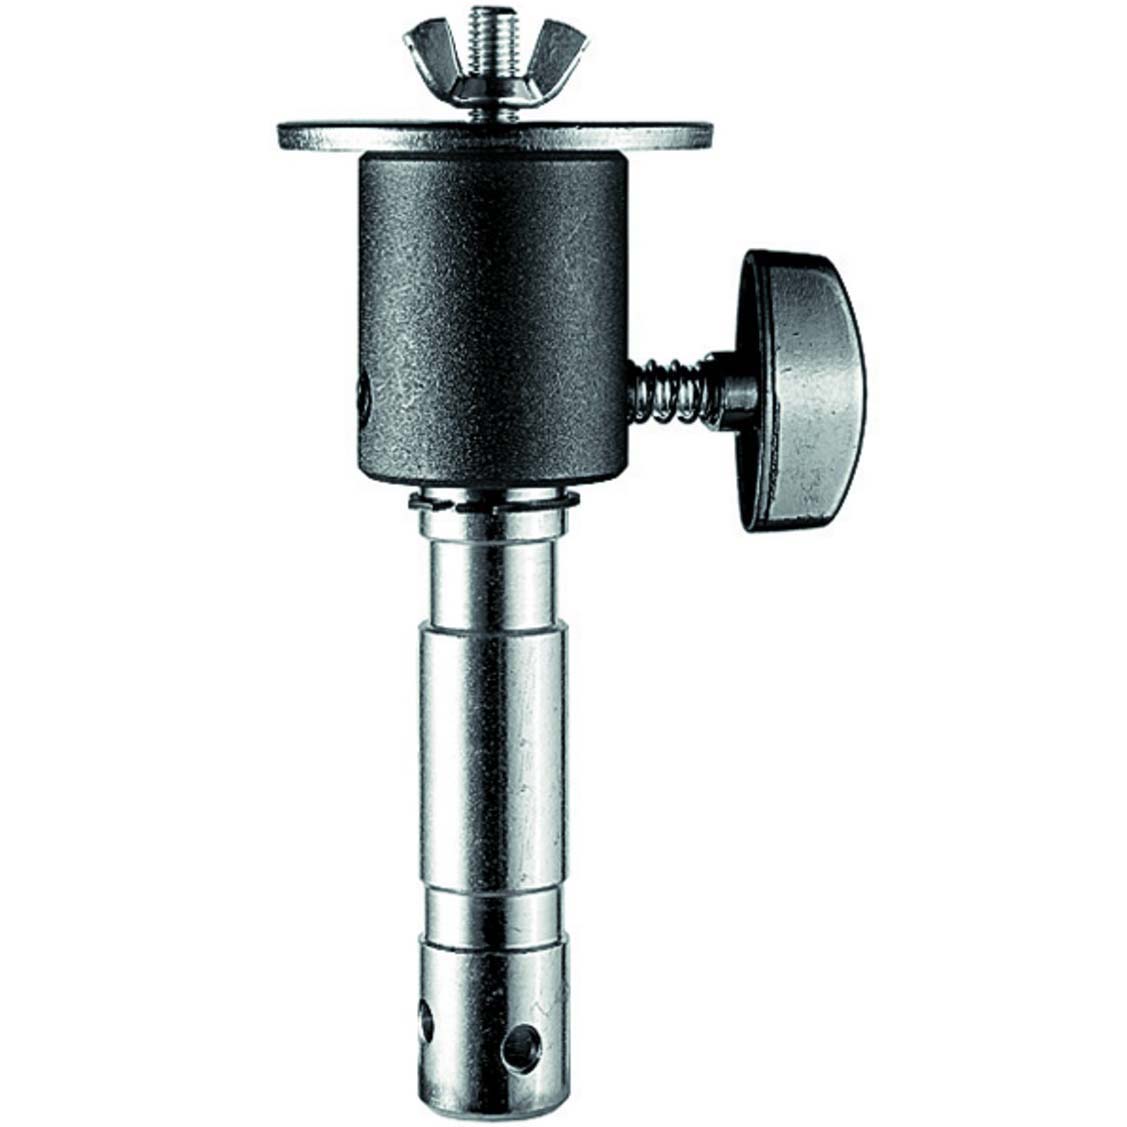 SPIGOT MANFROTTO 616-10 PAN M10 MANFROTTO 